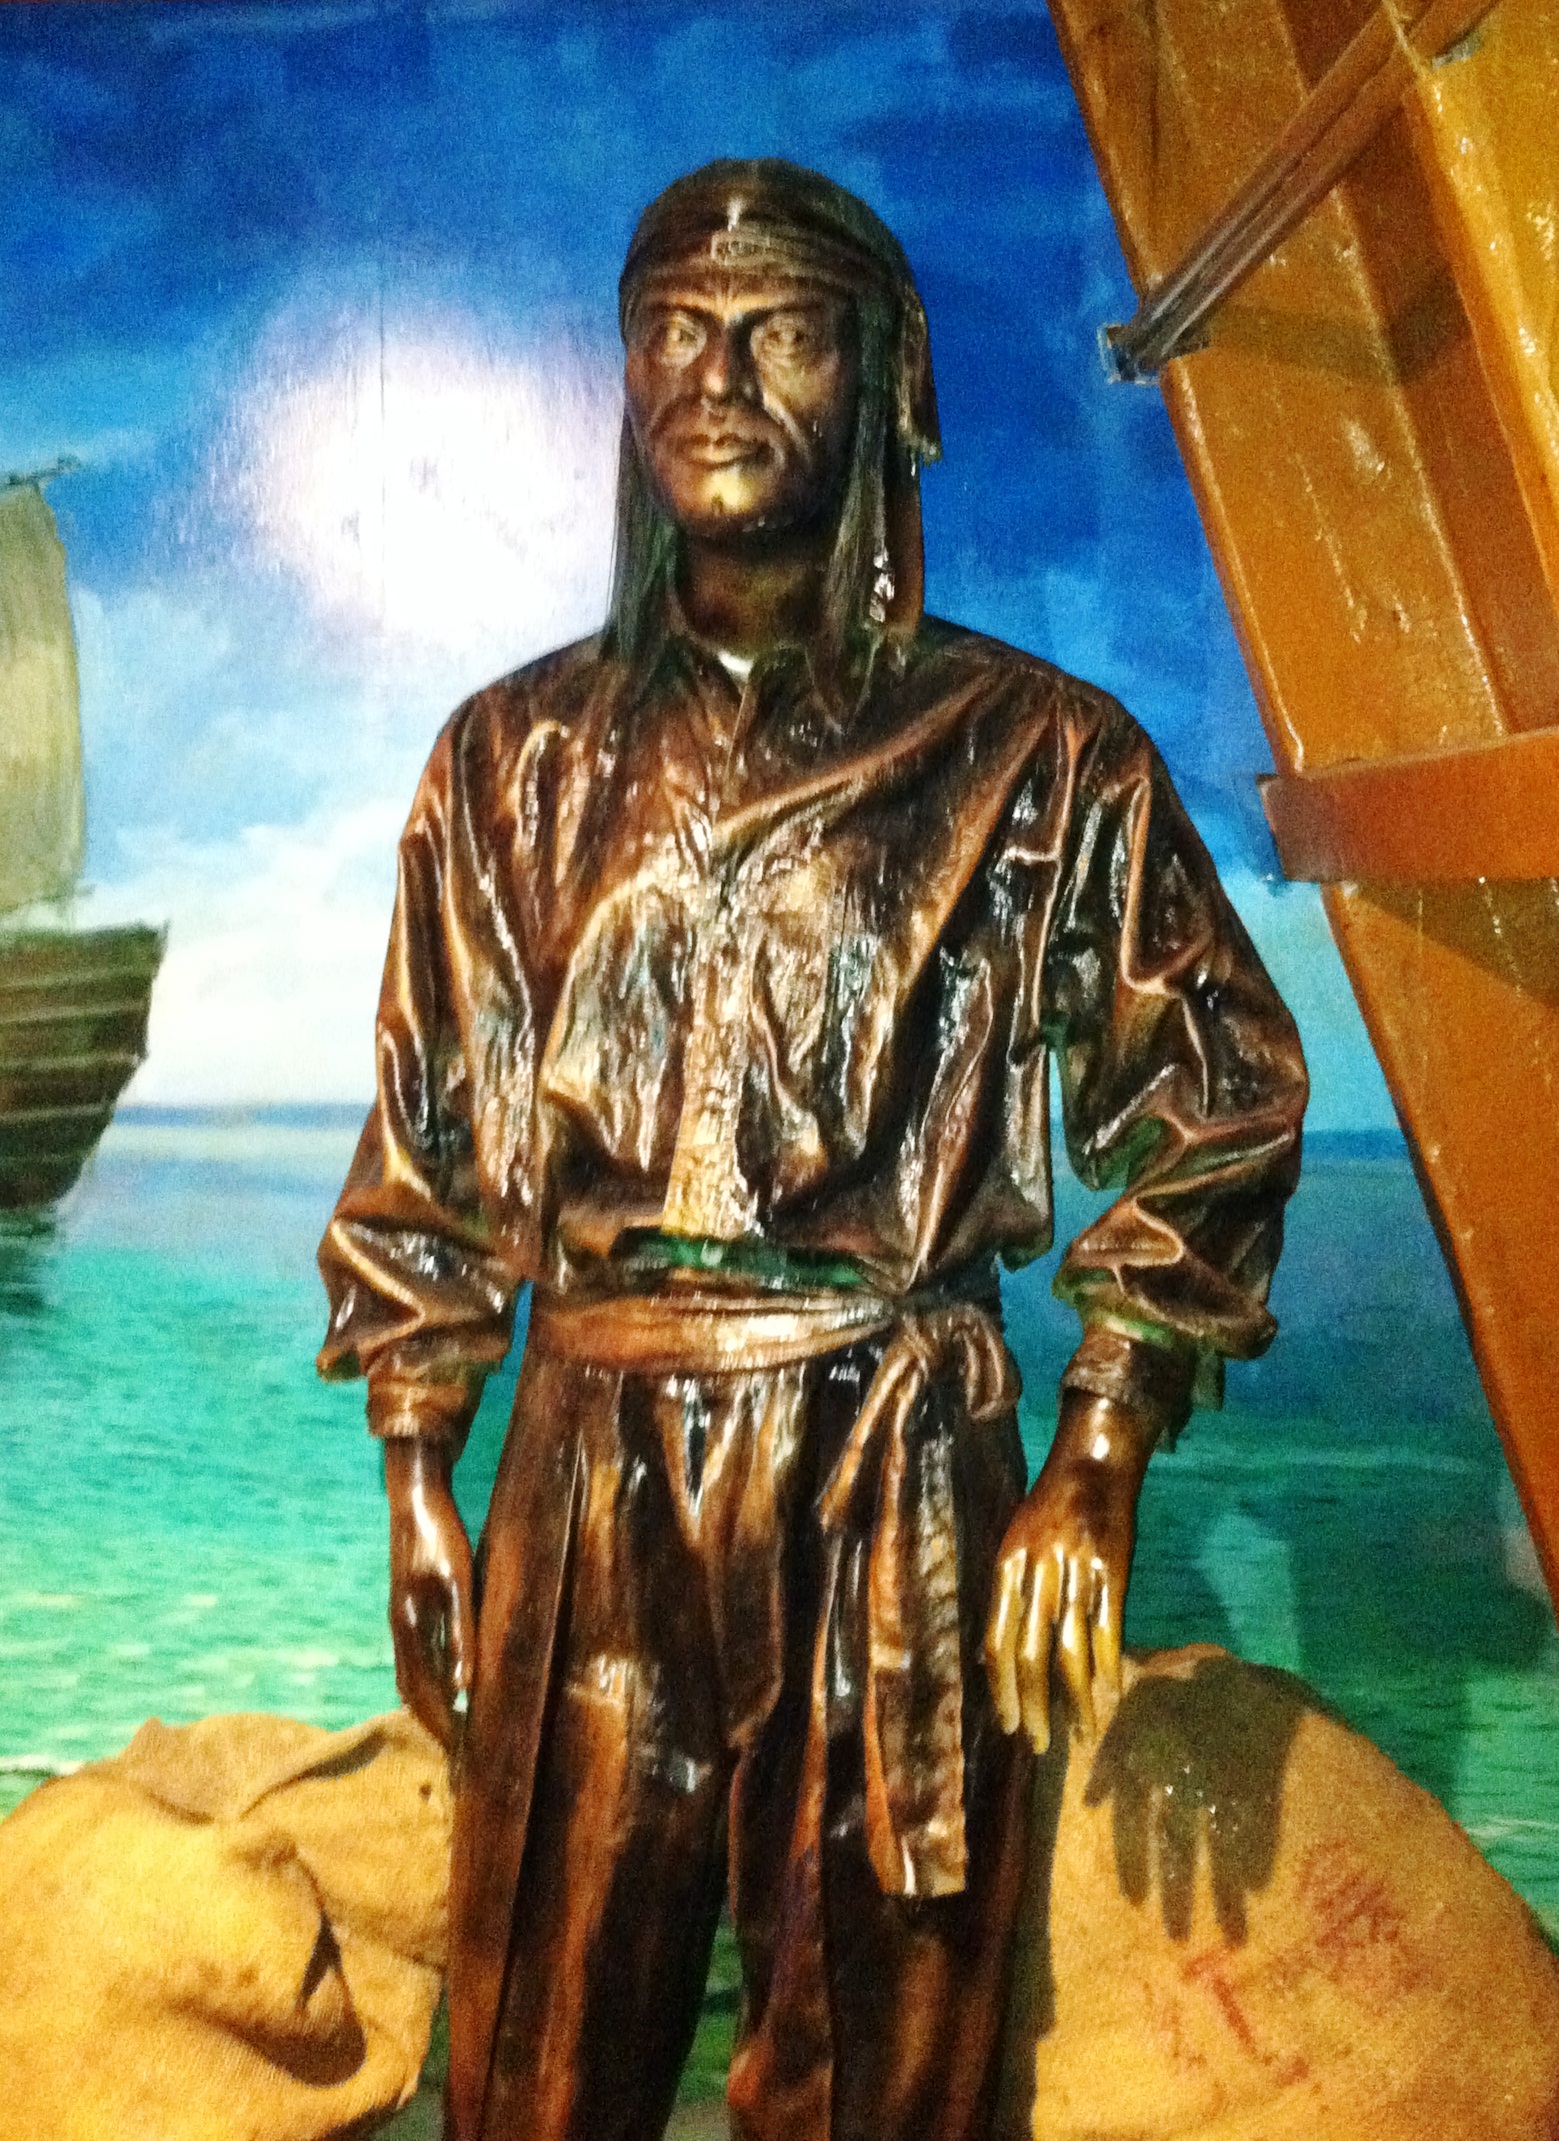 Statue of Enrique in the Maritime Museum of Malacca, Malacca City, Malaysia